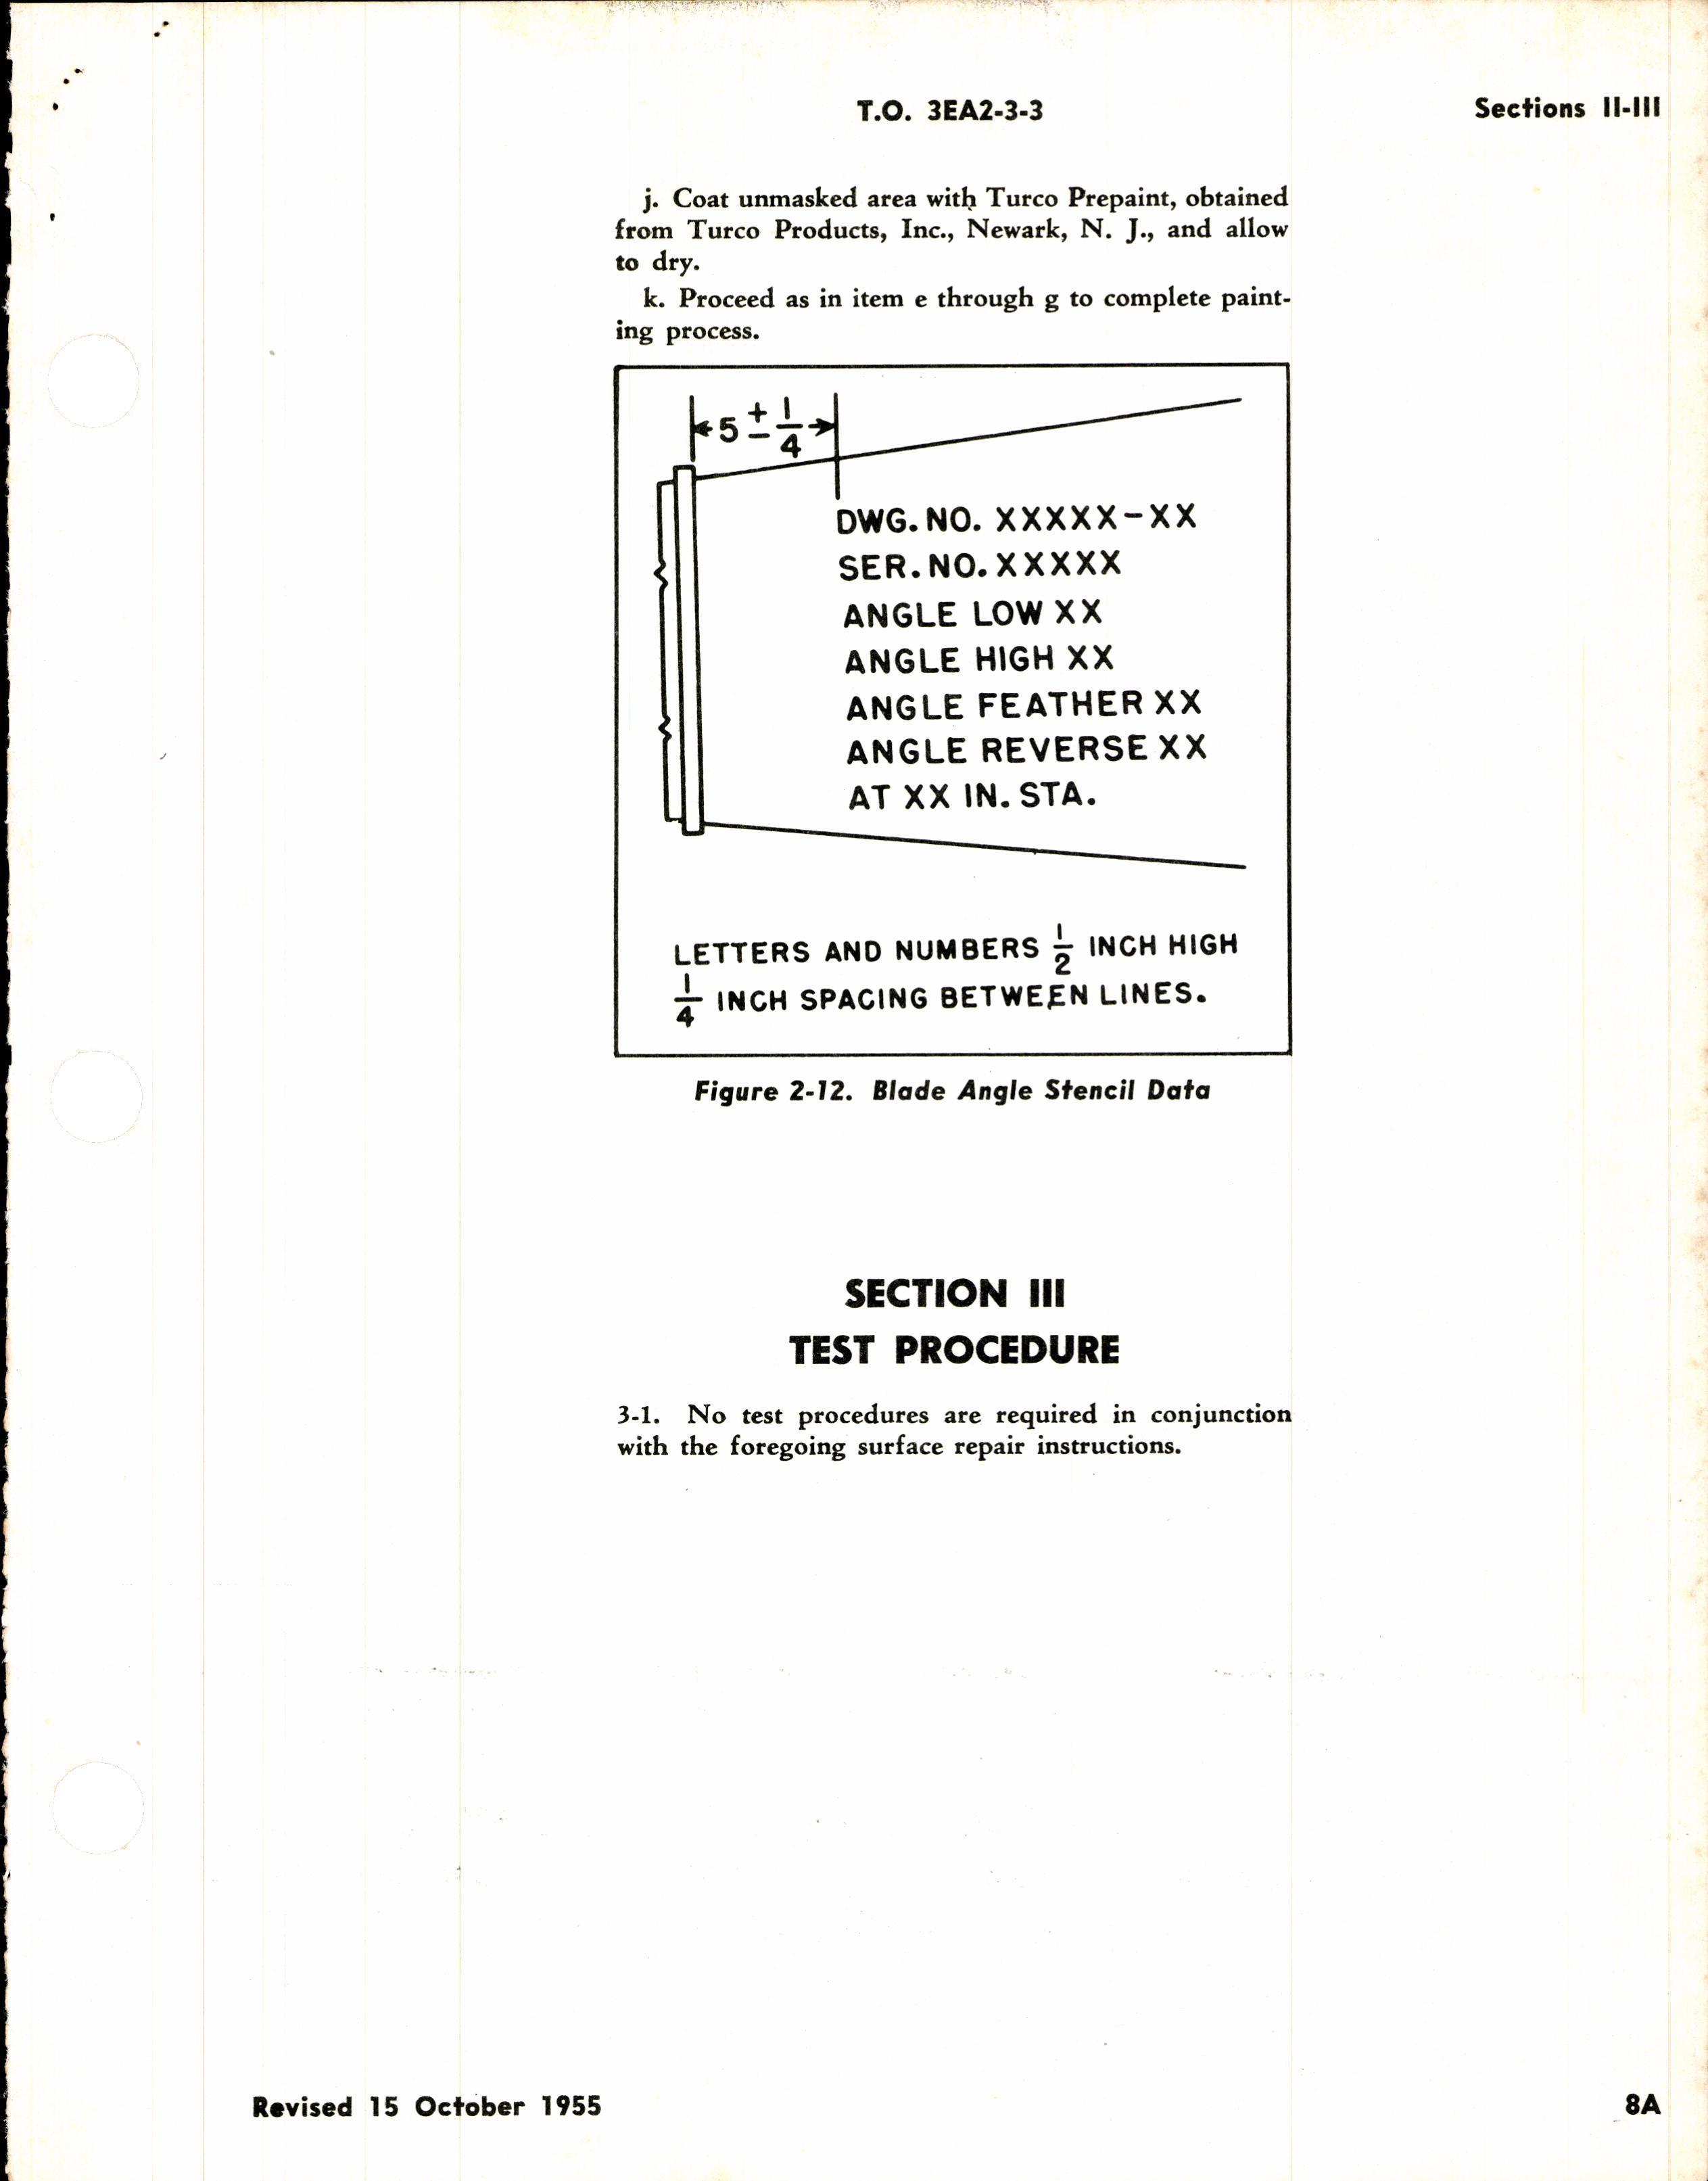 Sample page 7 from AirCorps Library document: Overhaul Instructions for Curtiss-Wright Blade Surface Repair